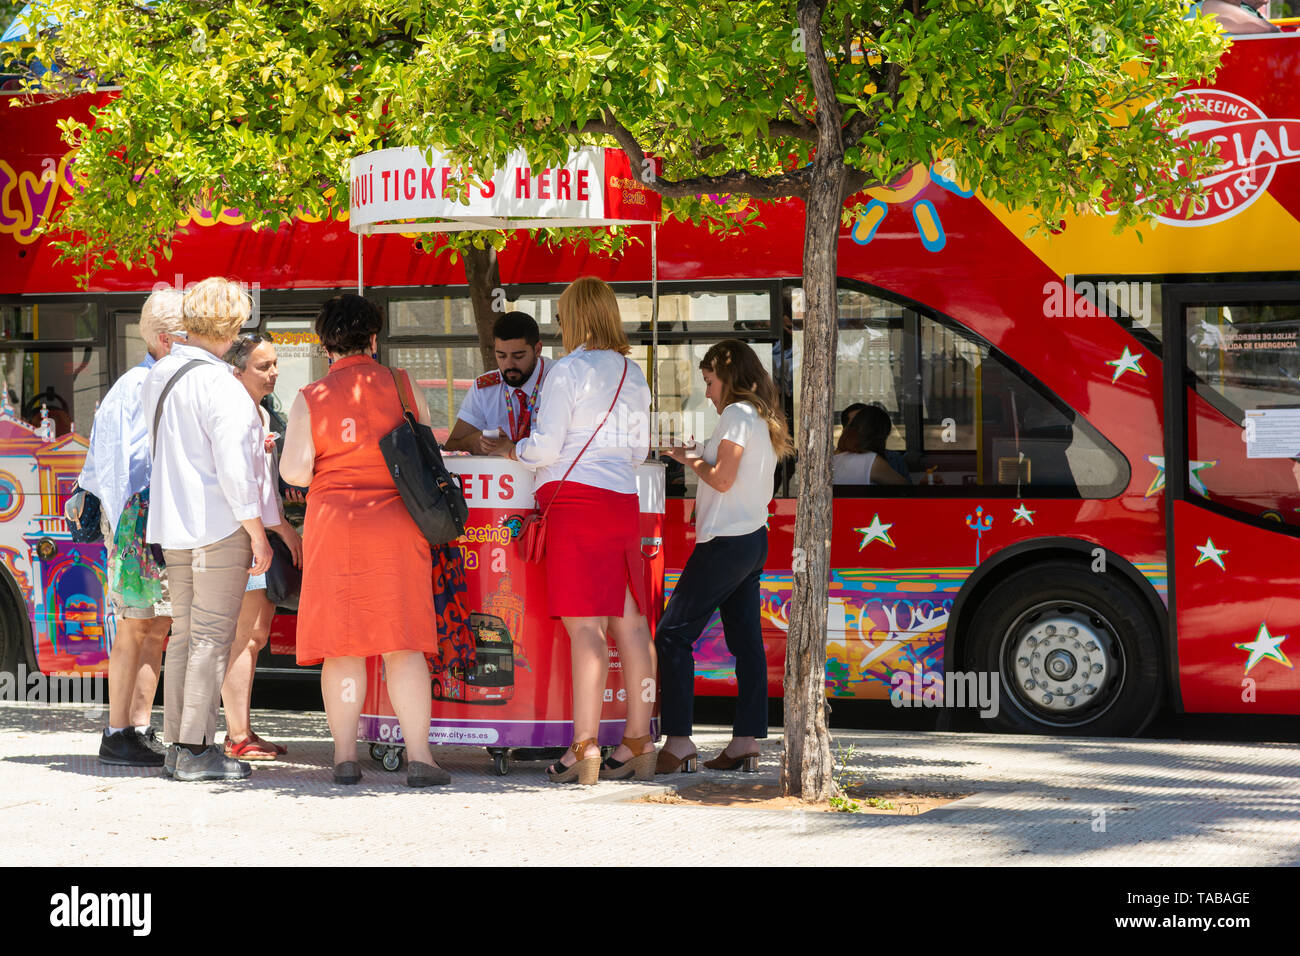 Tourists buying tickets for a hop-on hop-off sightseeing bus tour of Seville, Andalusia region, Spain Stock Photo